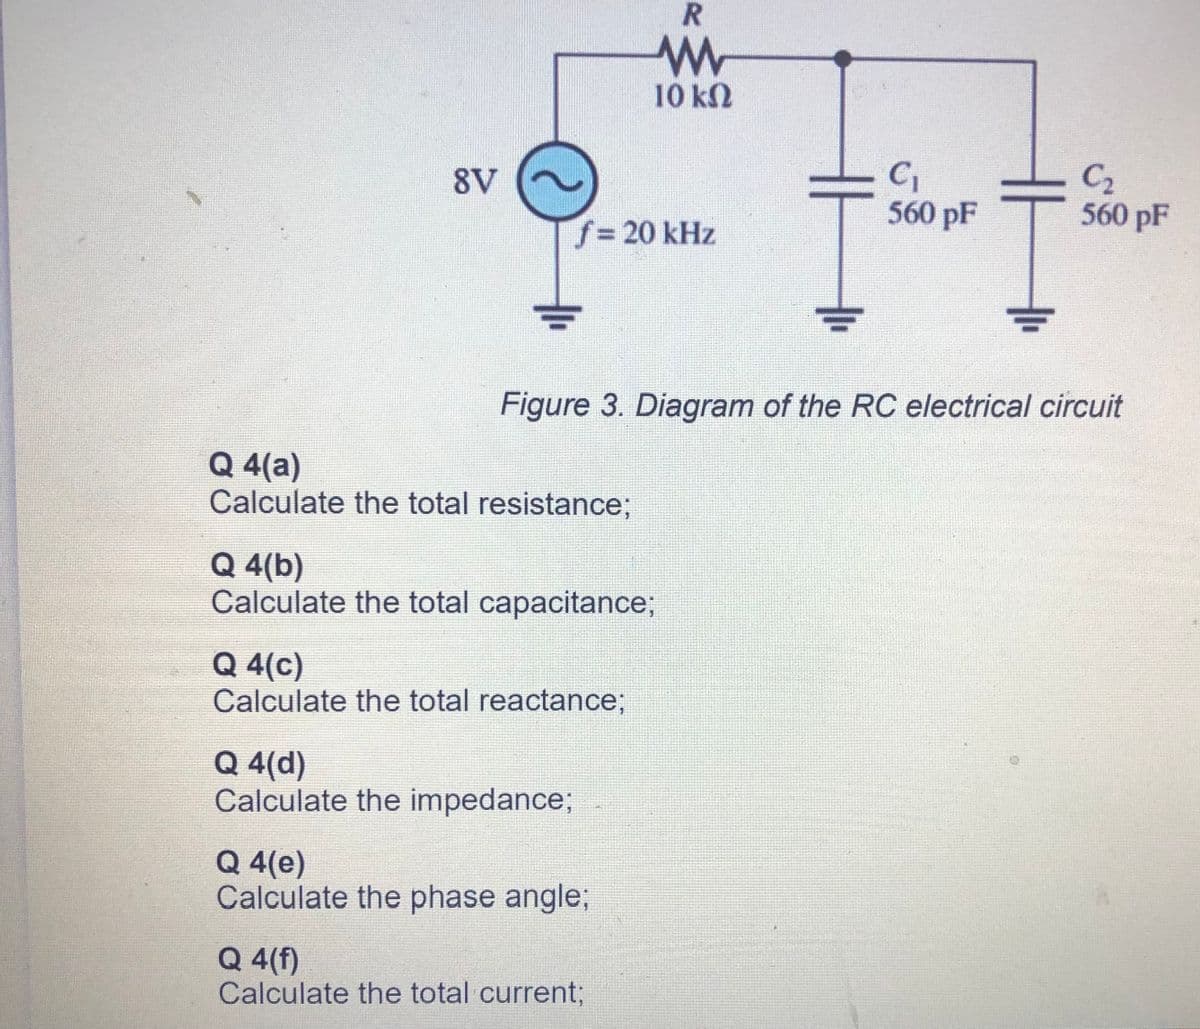 10 kN
C1
560 pF
C2
560 pF
8V
f%3D20 kHz
Figure 3. Diagram of the RC electrical circuit
Q 4(a)
Calculate the total resistance;
Q 4(b)
Calculate the total capacitance;
Q 4(c)
Calculate the total reactance;
Q 4(d)
Calculate the impedance;
Q 4(e)
Calculate the phase angle;
Q 4(f)
Calculate the total current;
